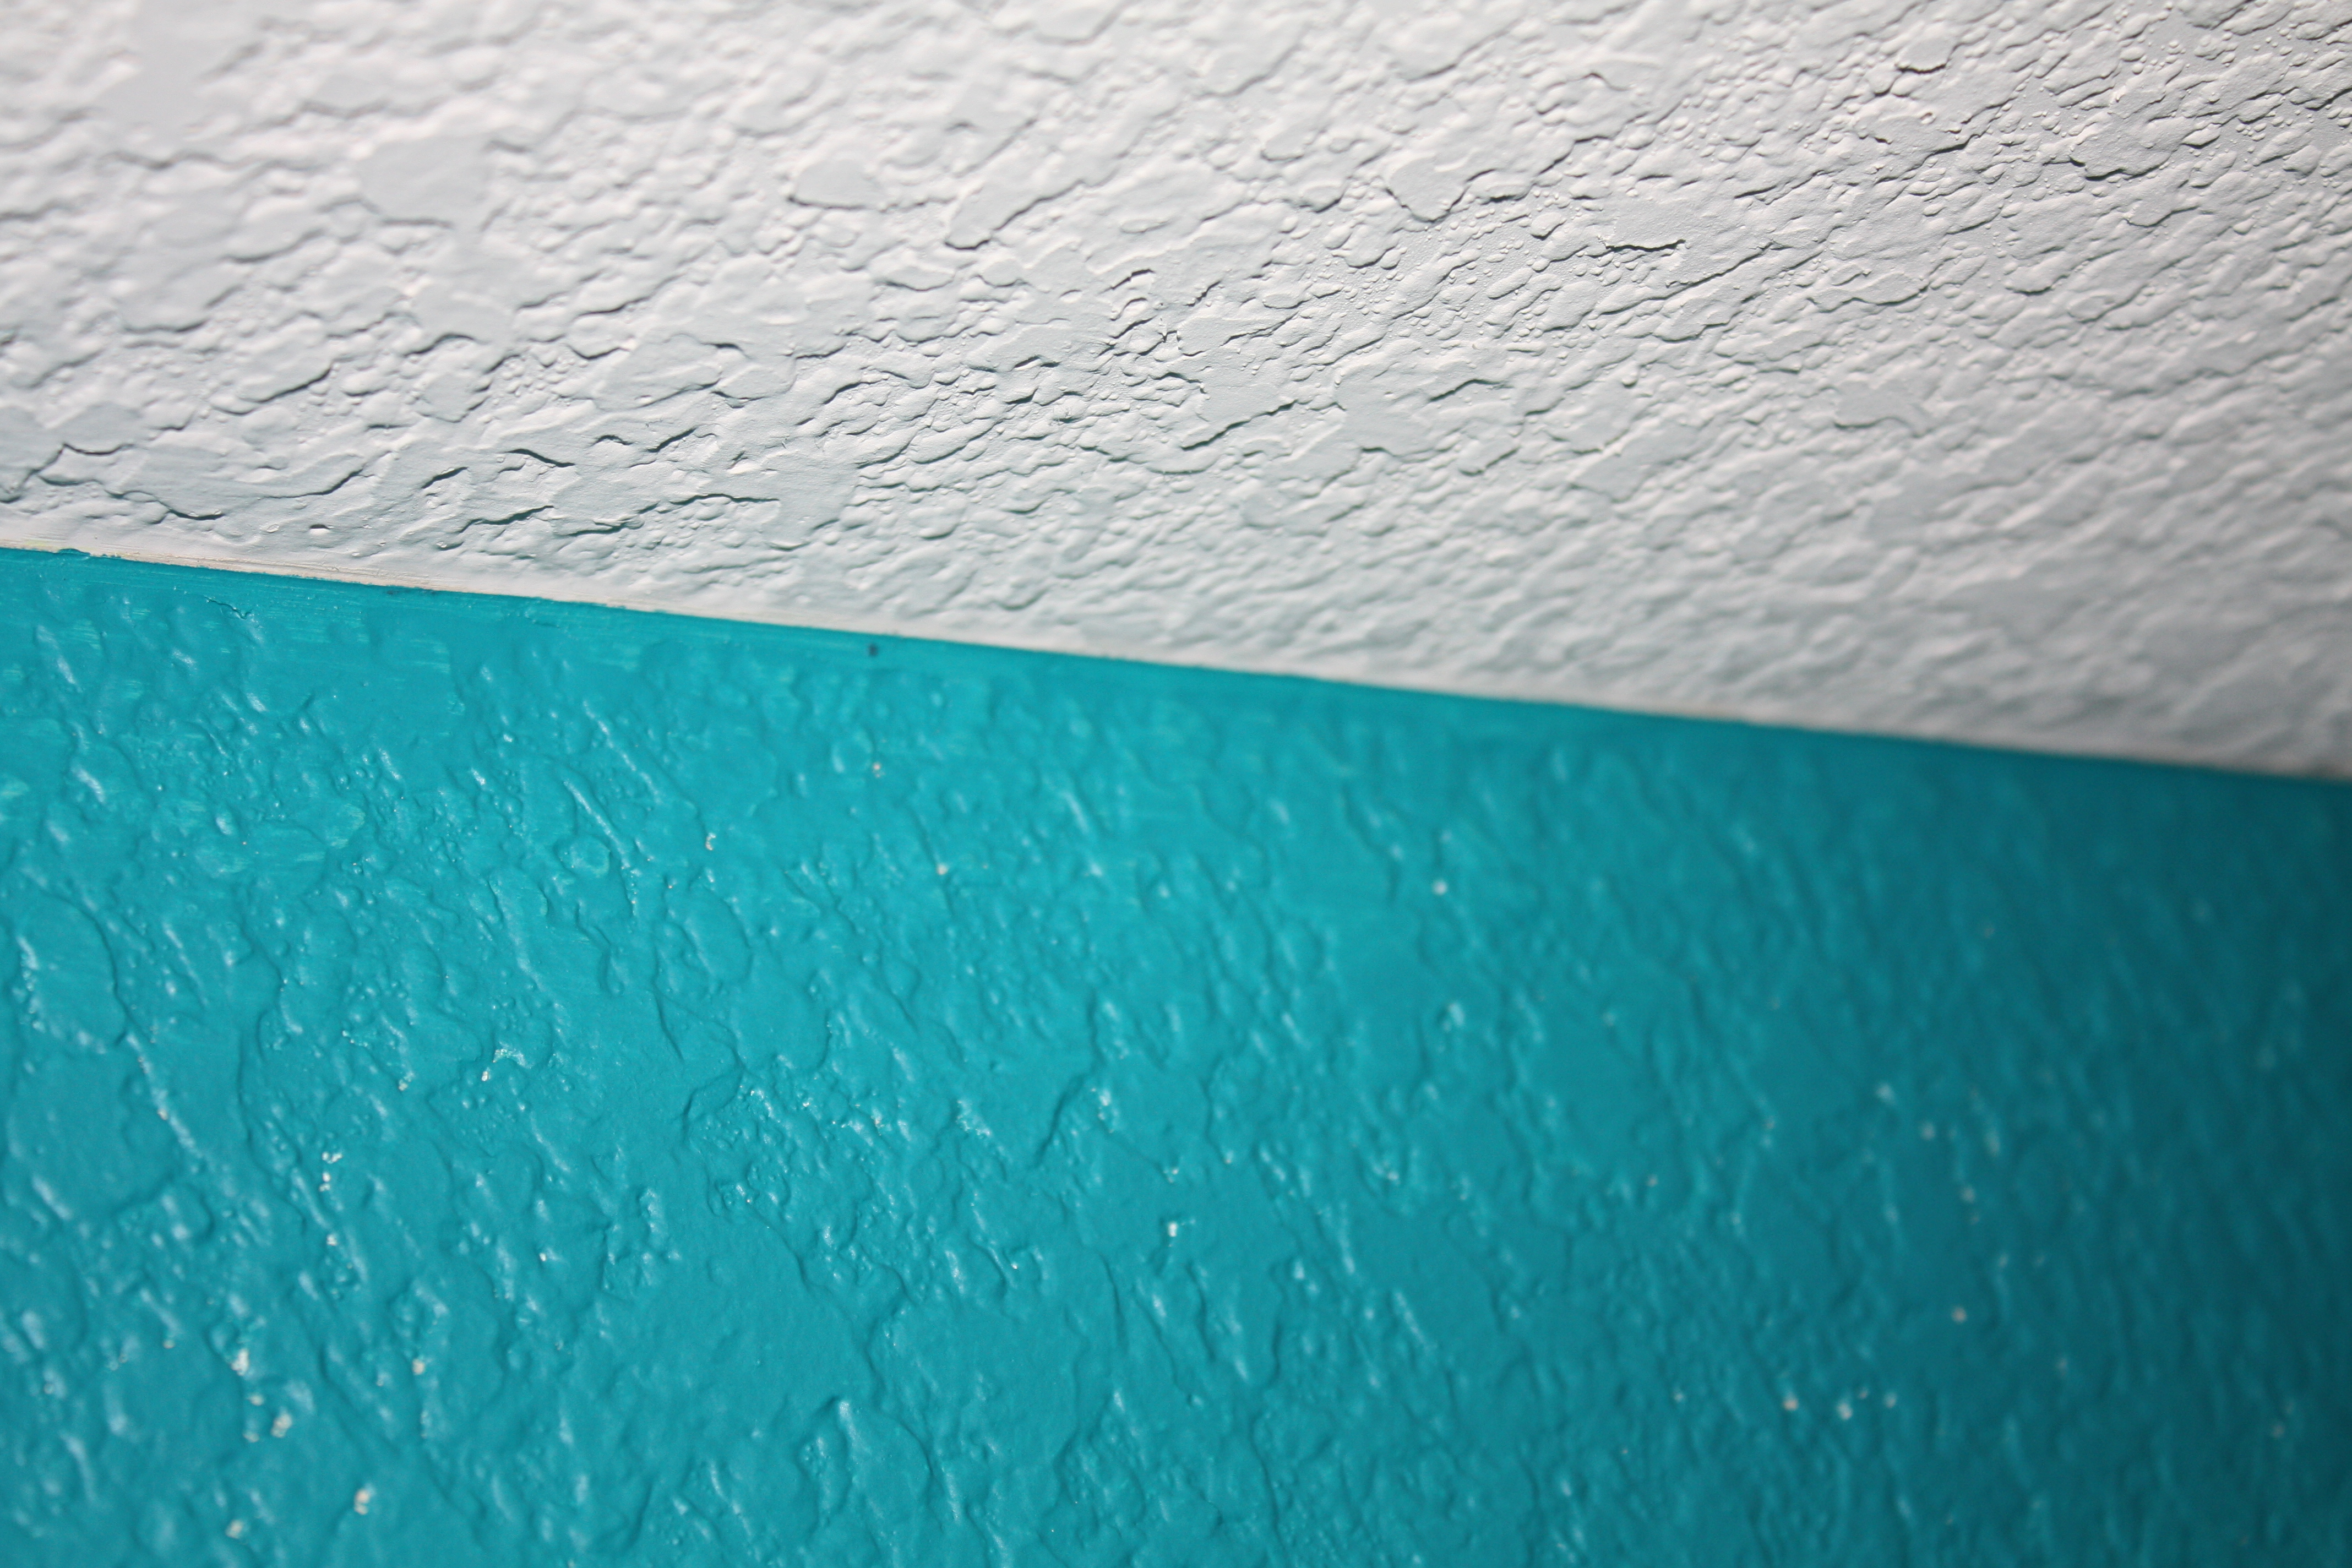 Should I Paint That: Painting Textured Walls